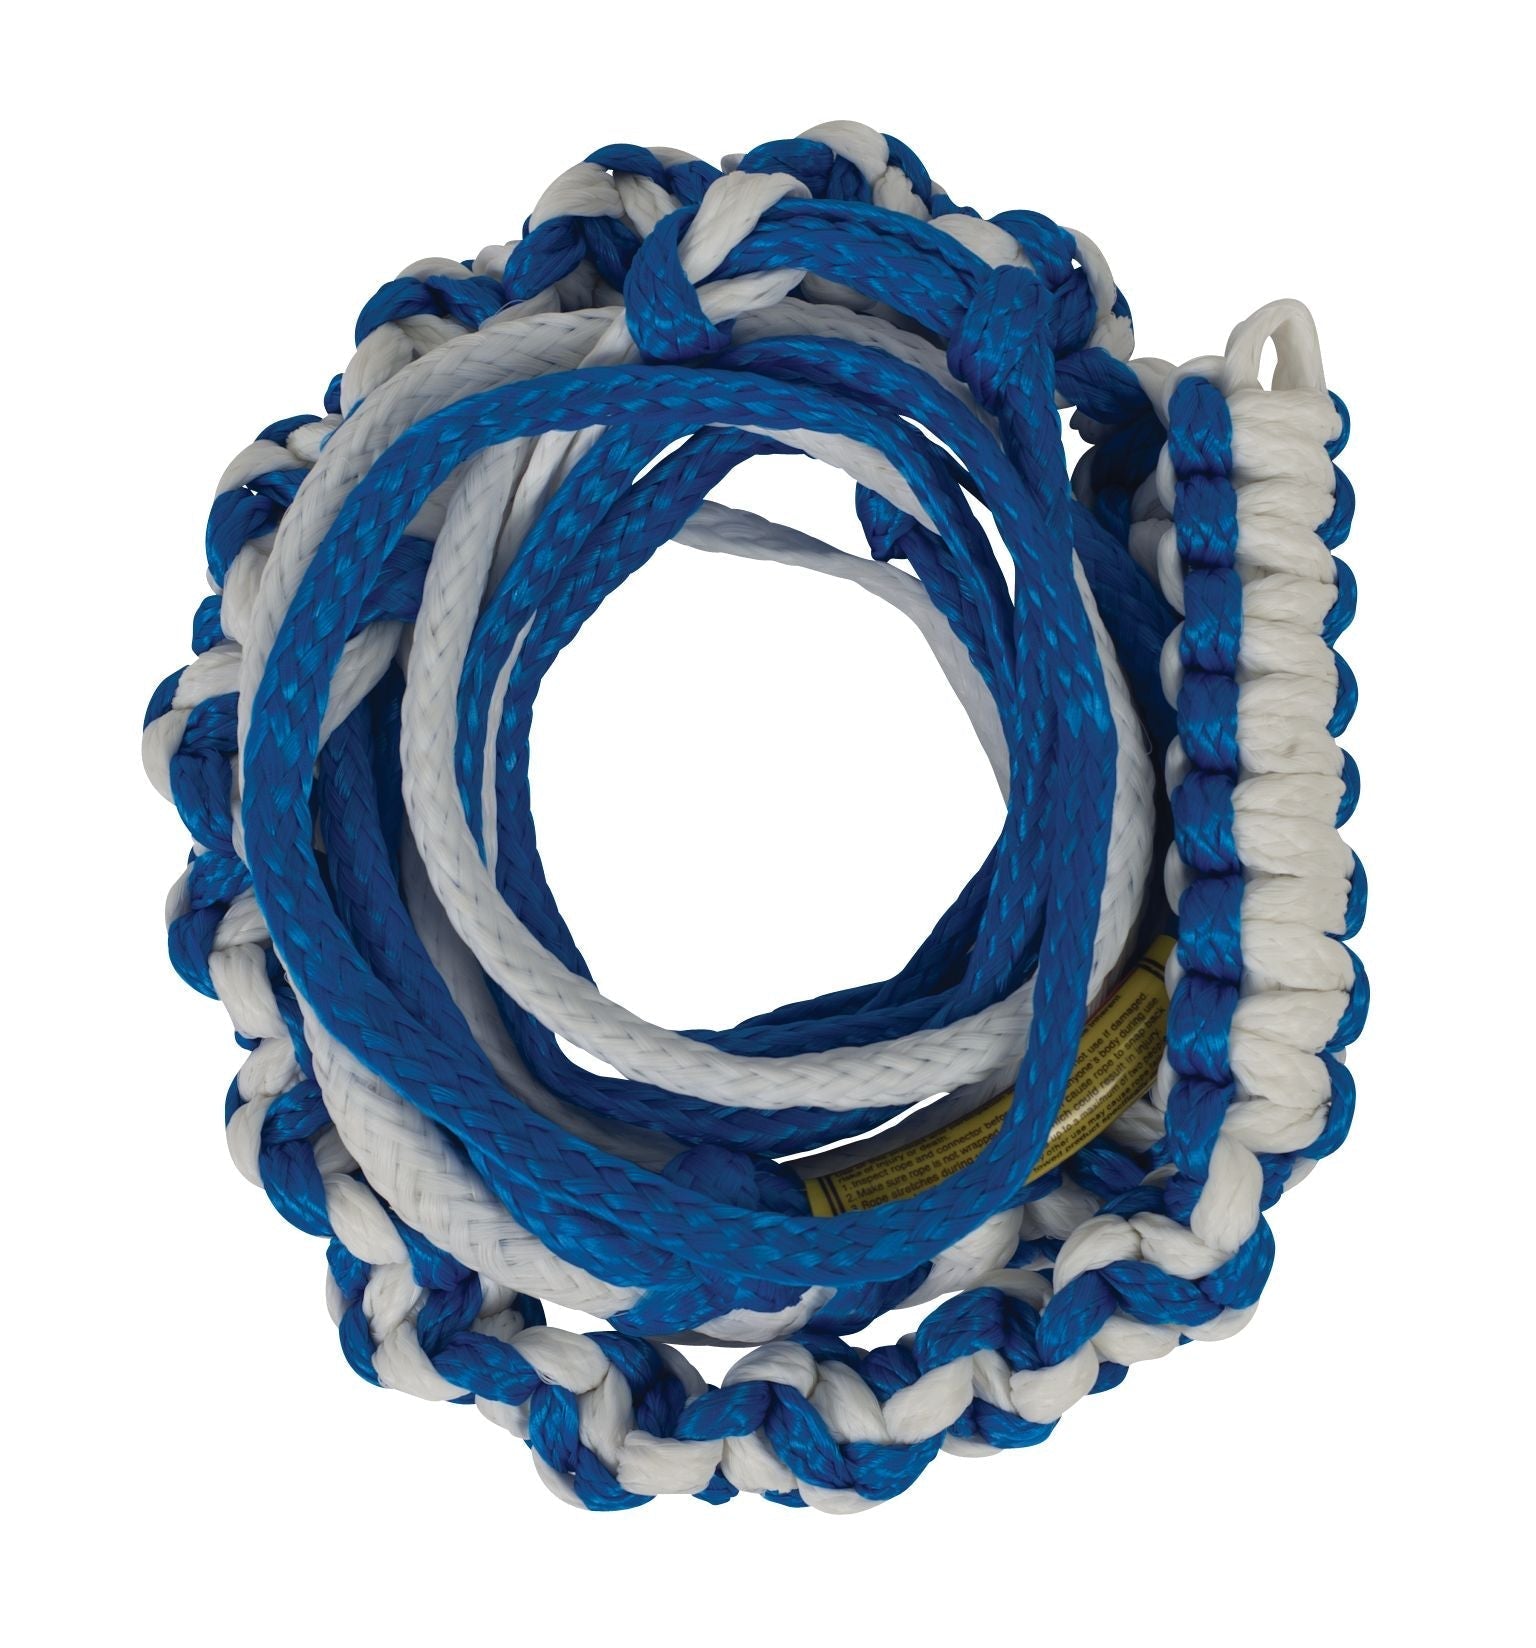 Hyperlite 20' Knotted Surf Rope blue